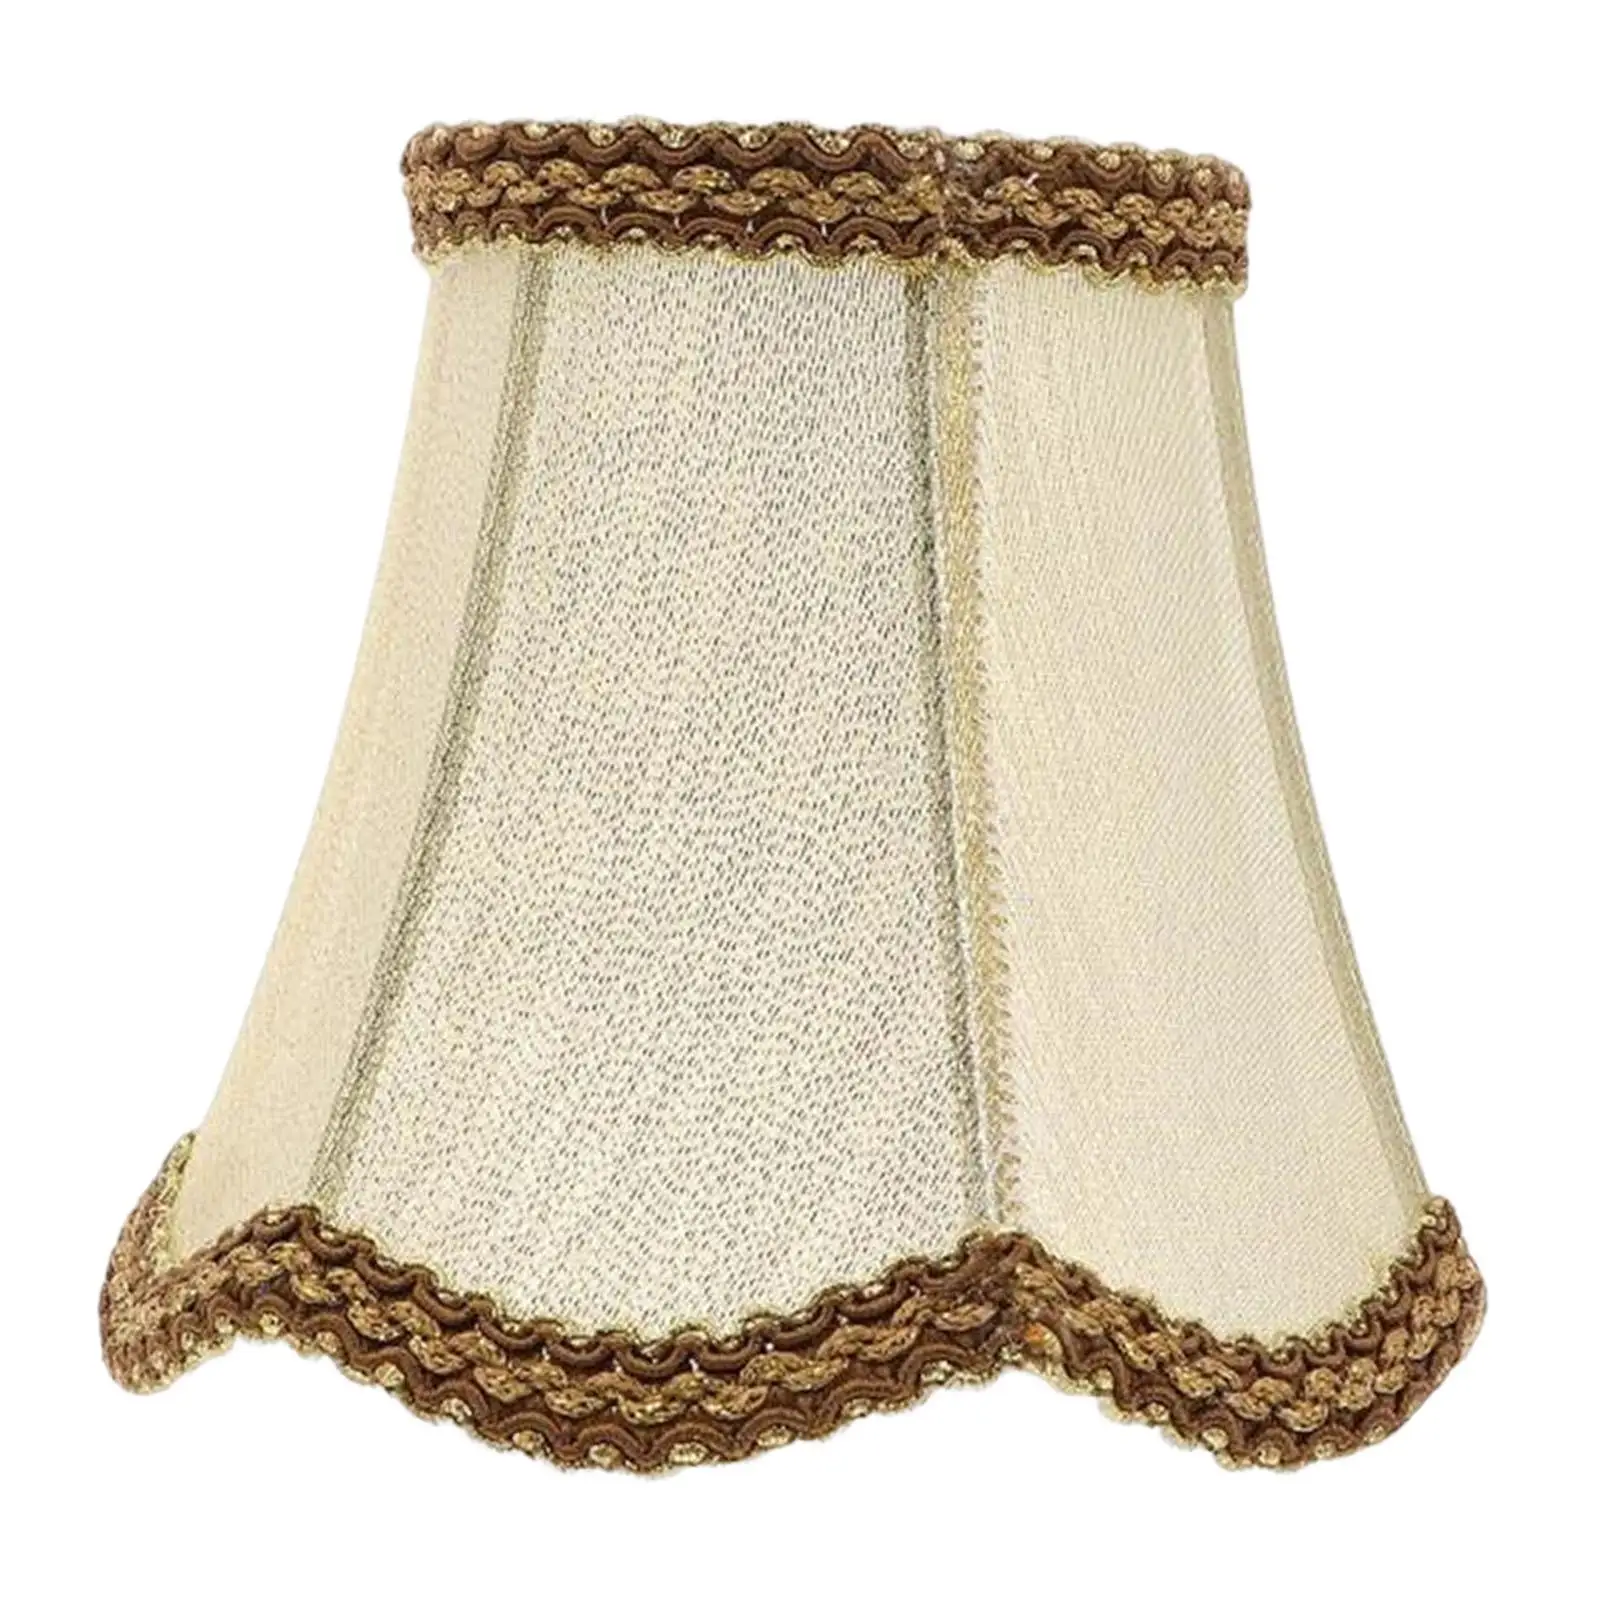 Retro Style Lamp Shade Wall Sconce Shade Lampshade for Dining Room Cafe Home